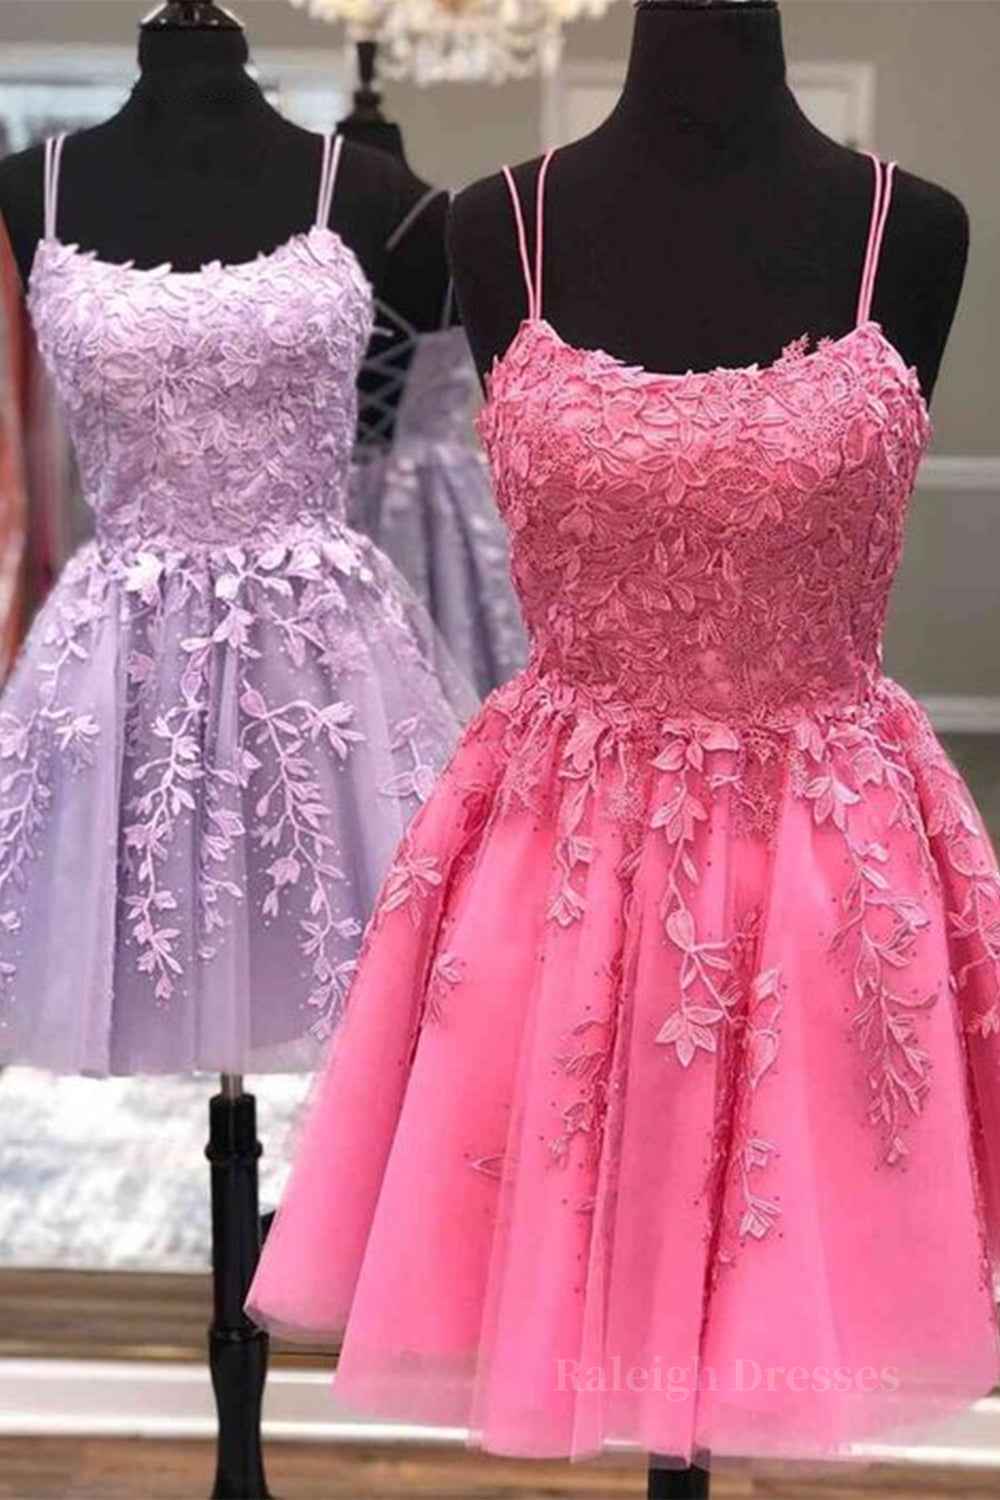 Short A Line Thin Straps Lace Prom Dress, Lace Homecoming Dress, Short Formal Evening Dress